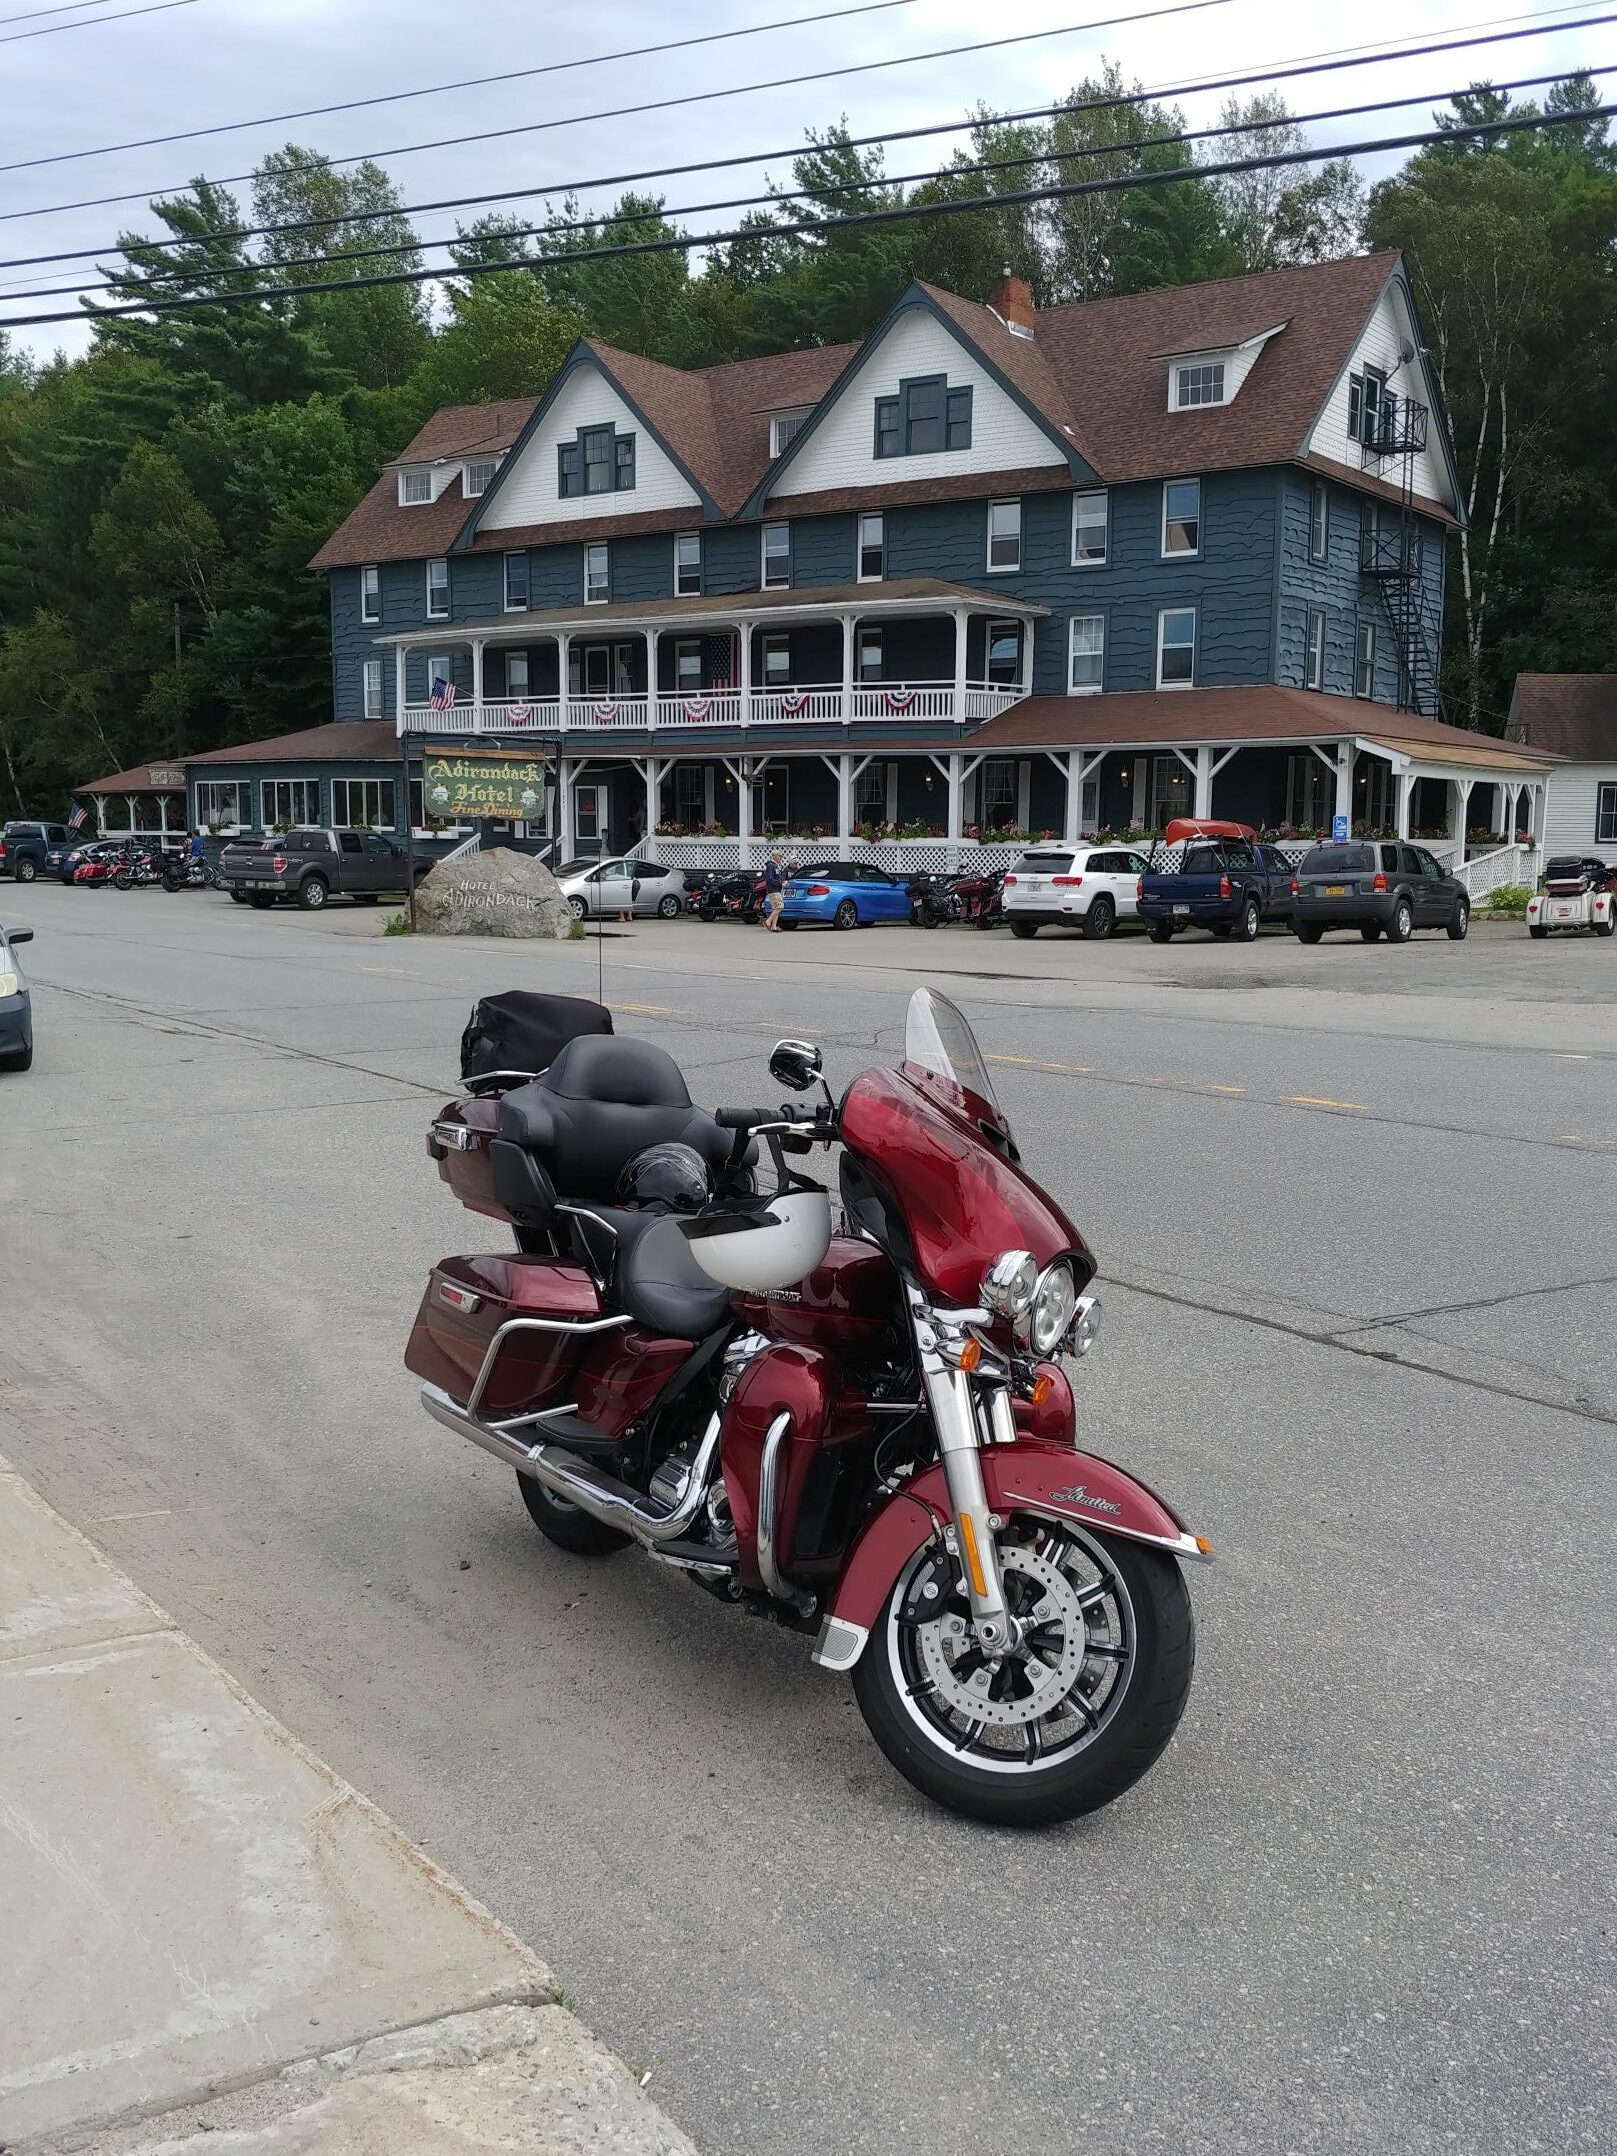 2017 Harley Davidson Ultra Limited parked in front of the Adirondack Motel in Long Lake, NY